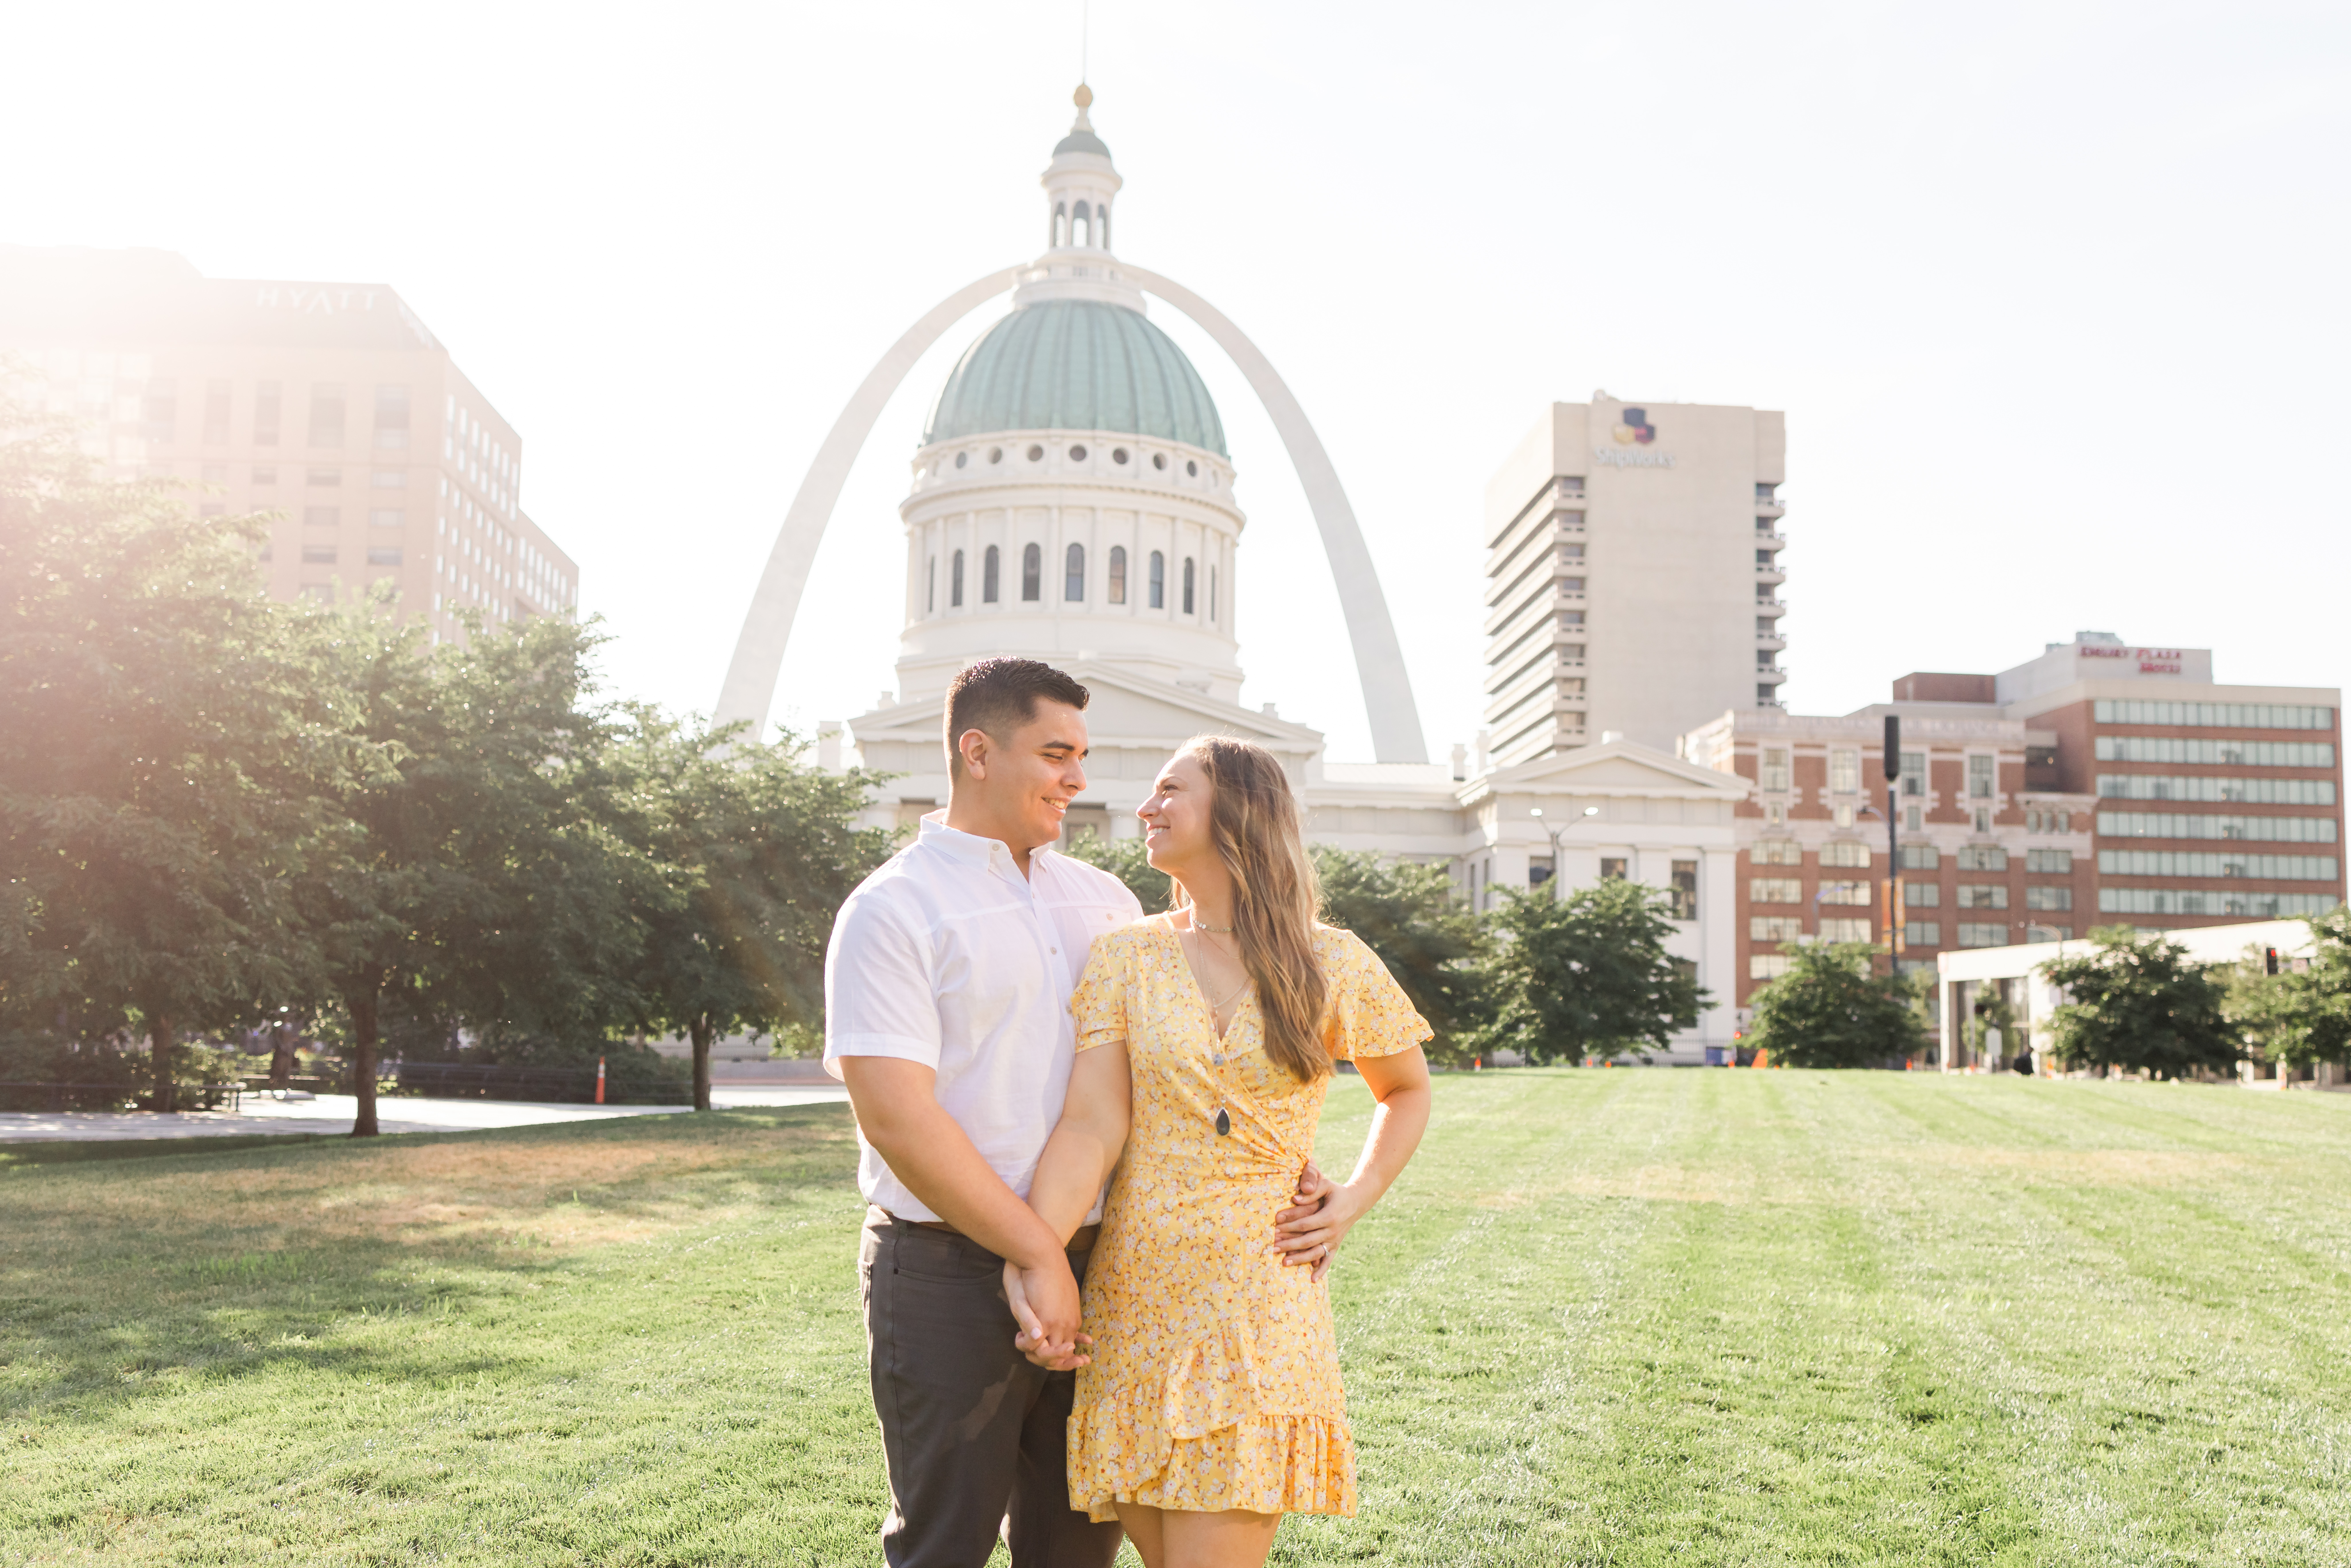 Sunrise engagement session at Kiener Plaza with the arch St. Louis, MO